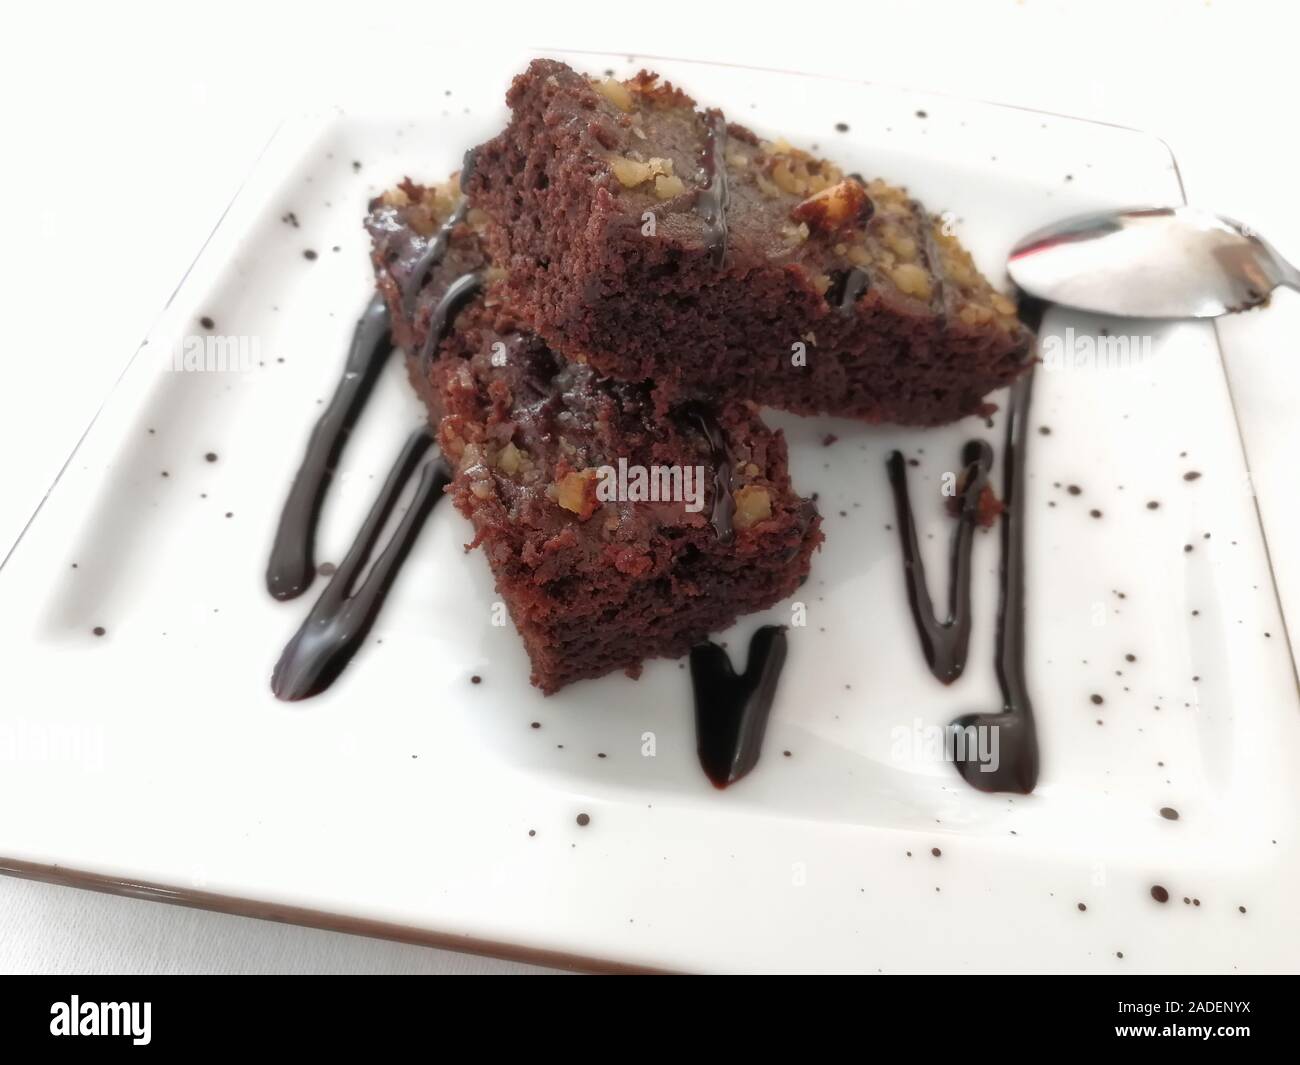 Delicious cake brownie in a Spanish restaurant Stock Photo